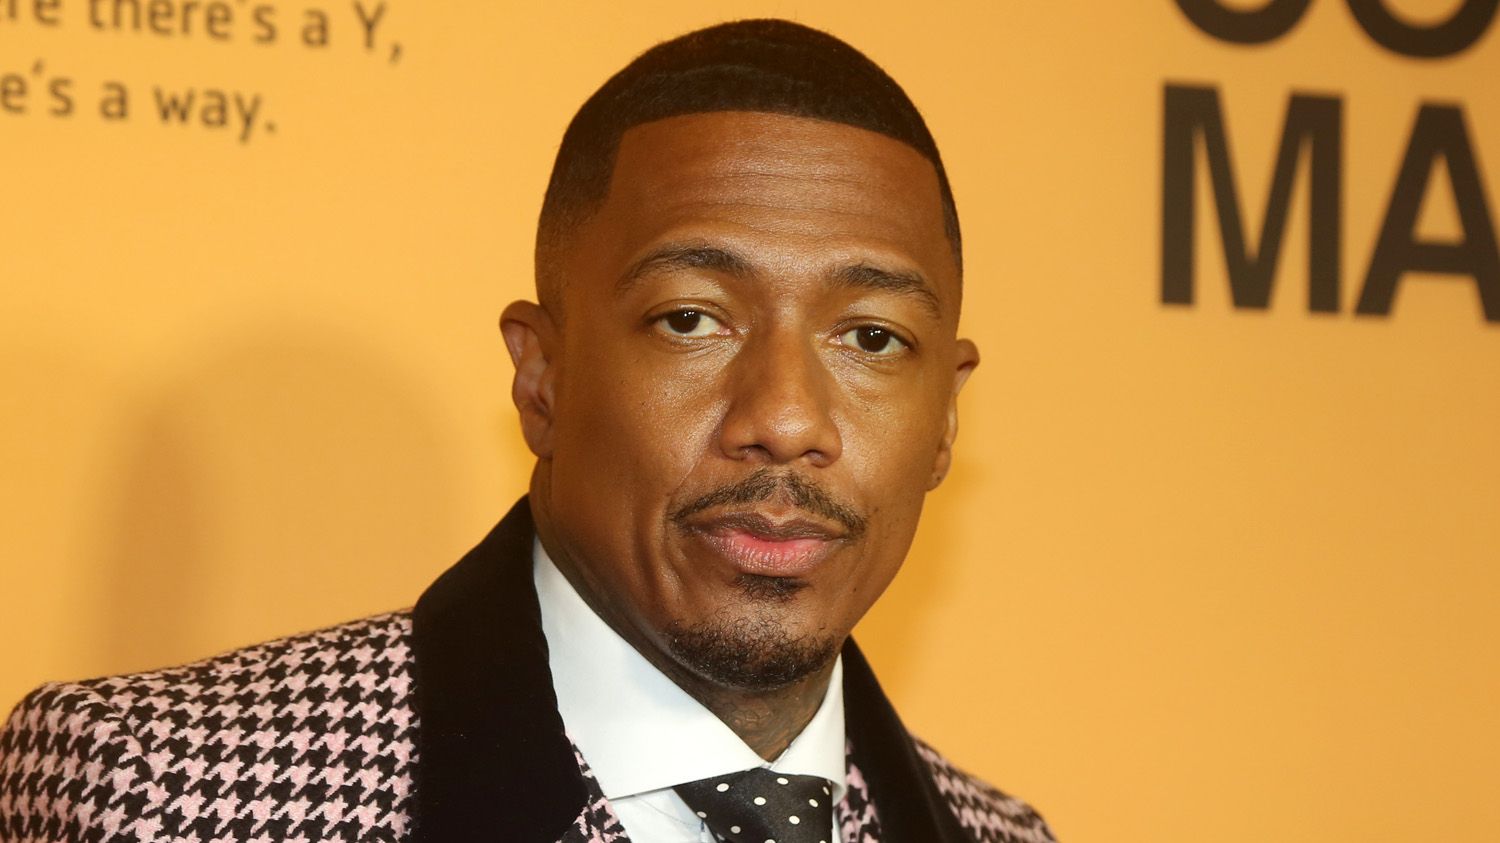 nick-cannon-and-zeus-network-face-backlash-for-dark-skin-vs-light-skin-competition